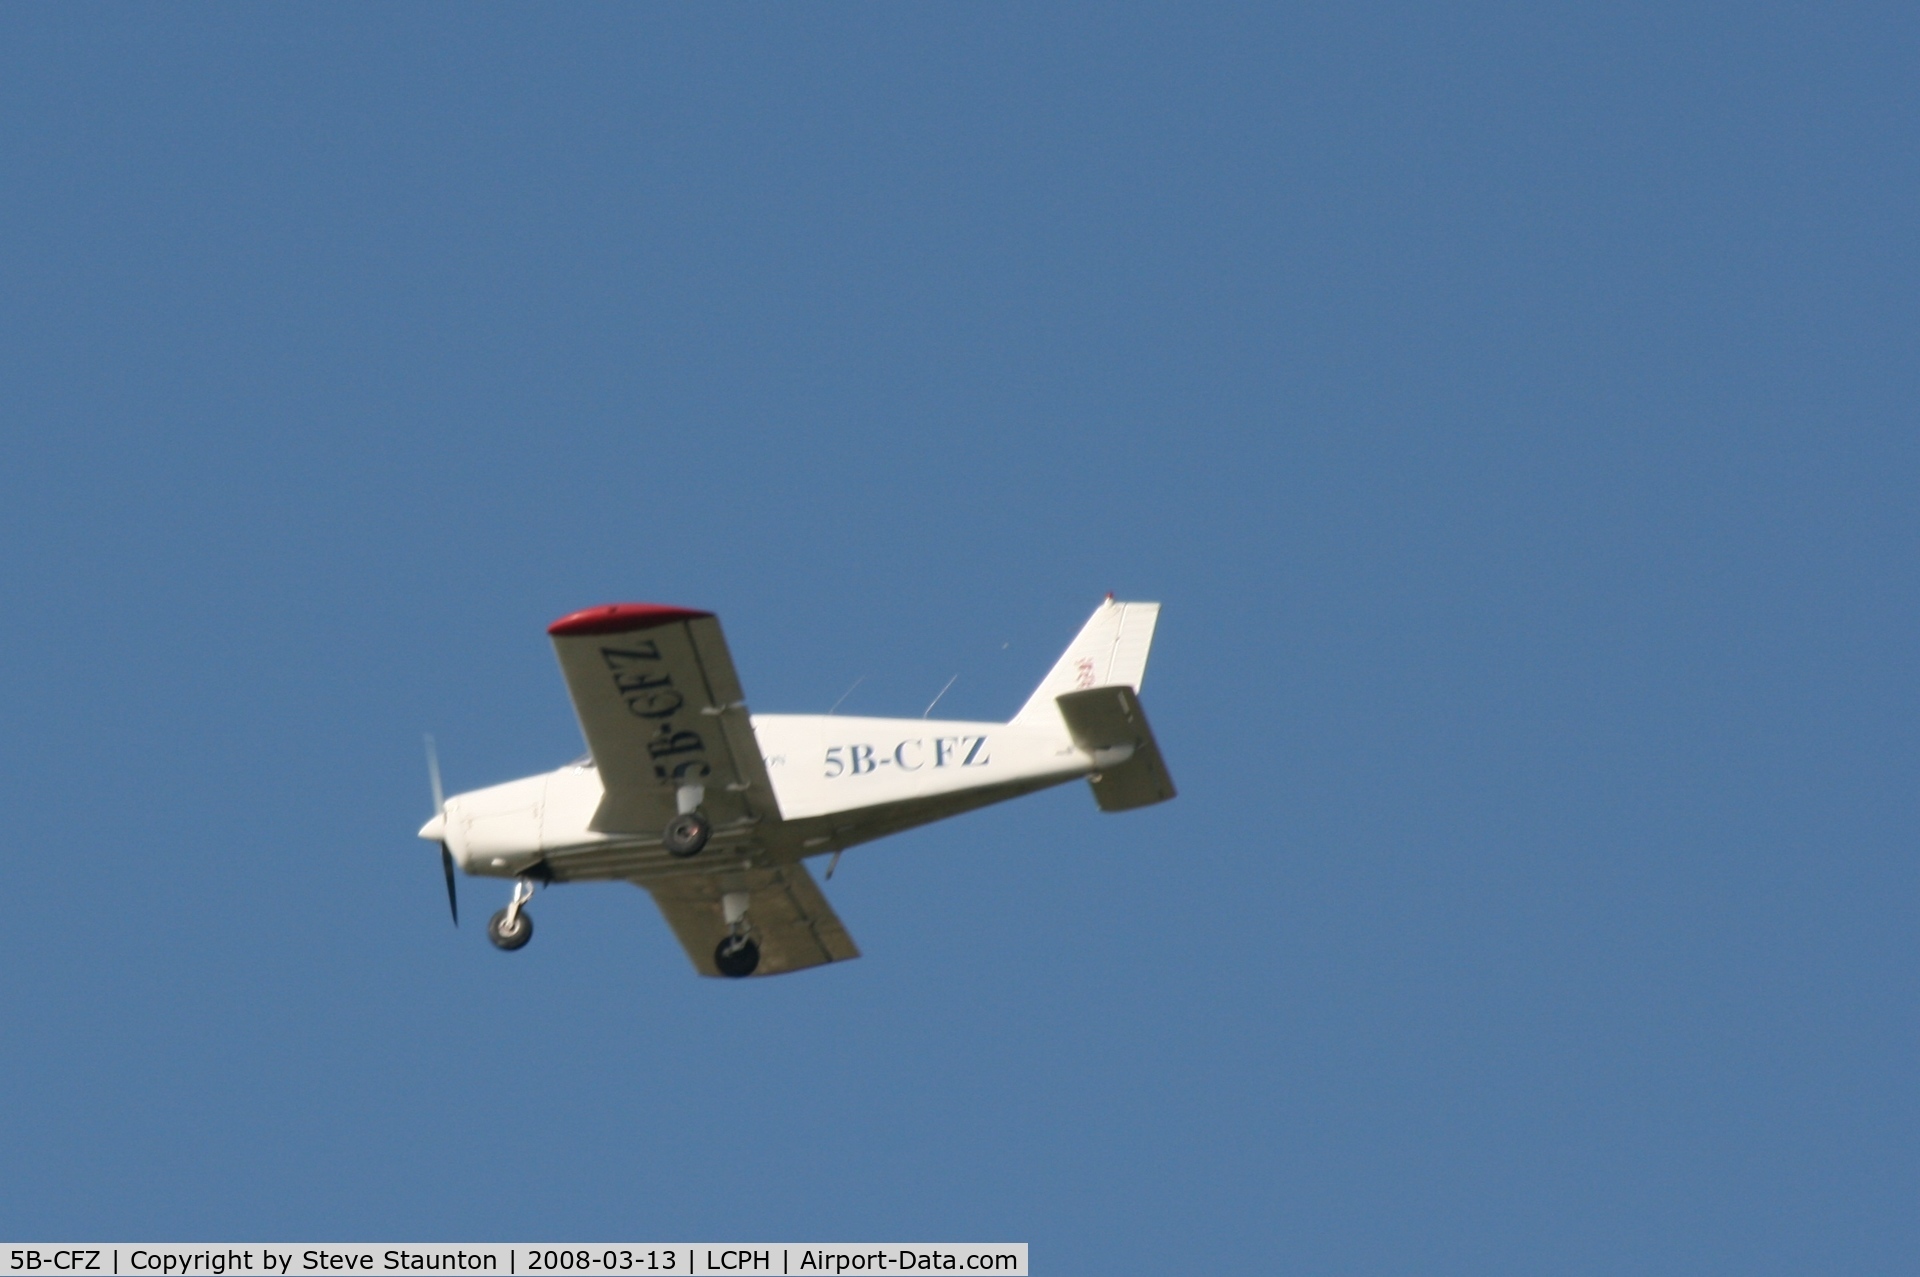 5B-CFZ, Piper PA-28-140 Cherokee C/N 28-7125287, Taken on the approach to Paphos Airport, Cyprus